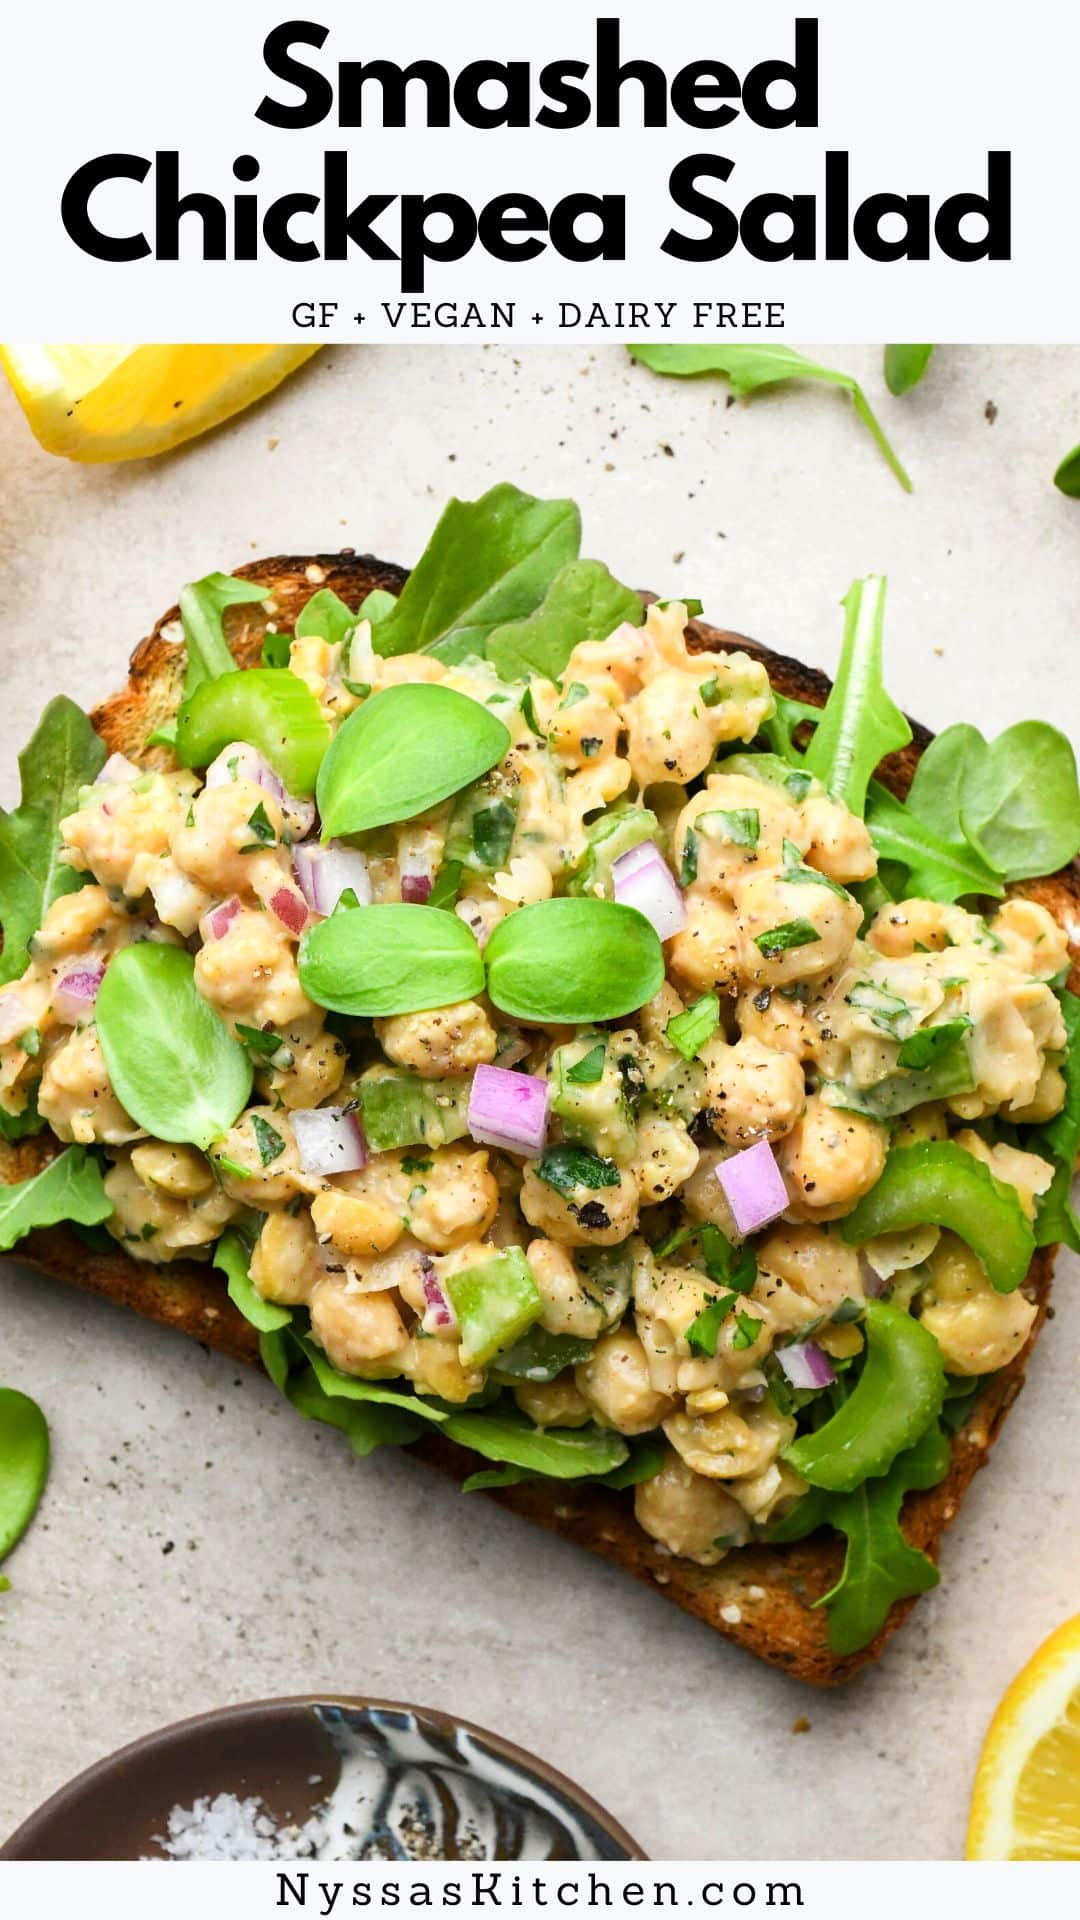 Smashed chickpea salad is the perfect healthy-in-a-hurry recipe for lunch, dinner, or meal prep. Made with all the traditional flavors of a classic tuna salad, but with chickpeas instead of tuna! Delicious on it's own, in lettuce wraps, or for a sandwich. So versatile and ready in less than 20 minutes! Vegan / vegetarian, gluten free, dairy free, nut free, and soy free.